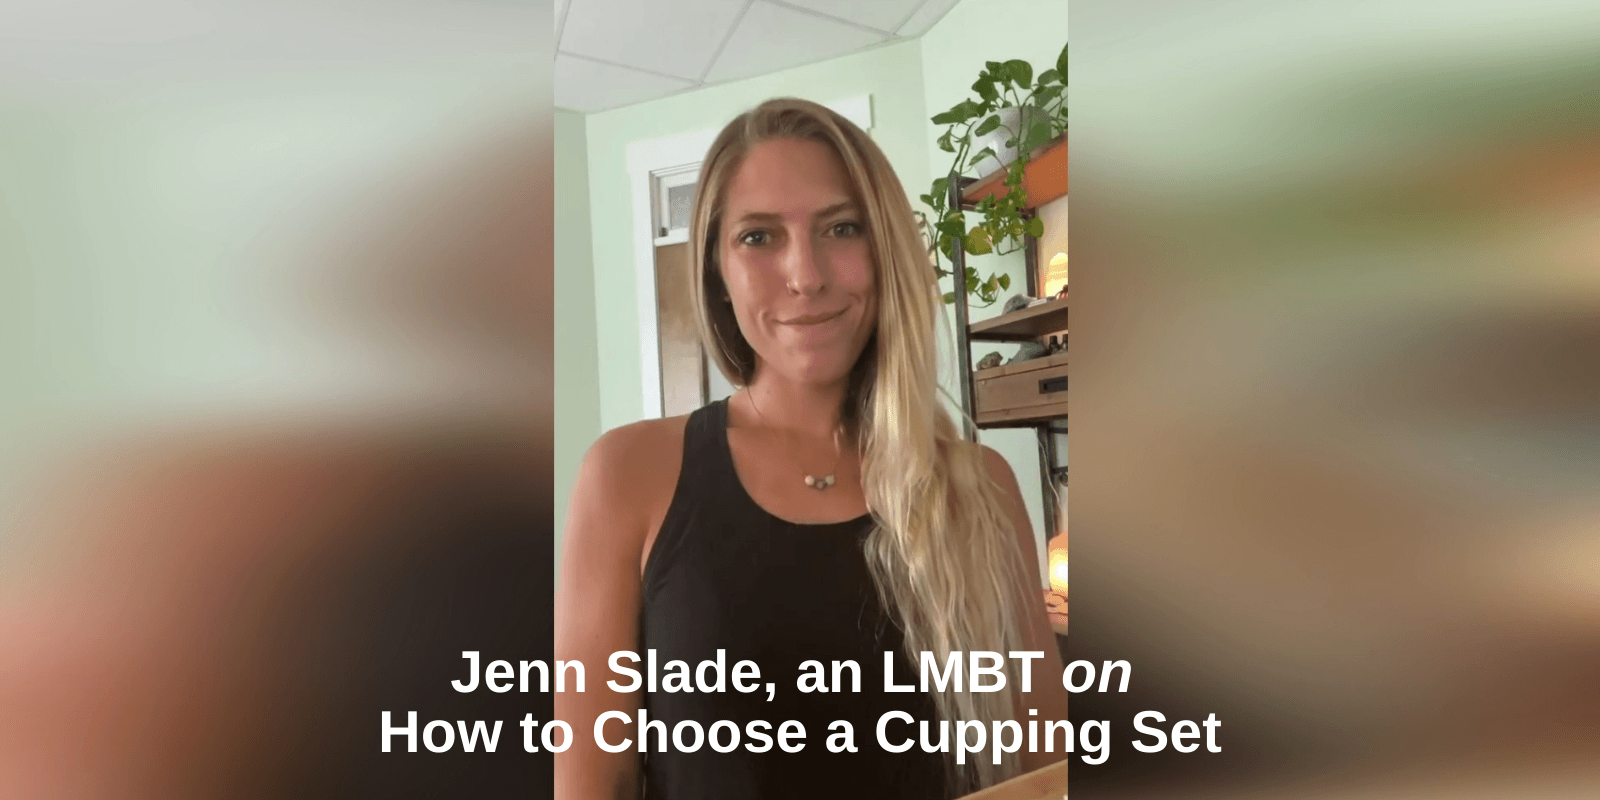 GO CUP YOURSELF Part 5 - How to Choose a Cupping Set - Lure Essentials